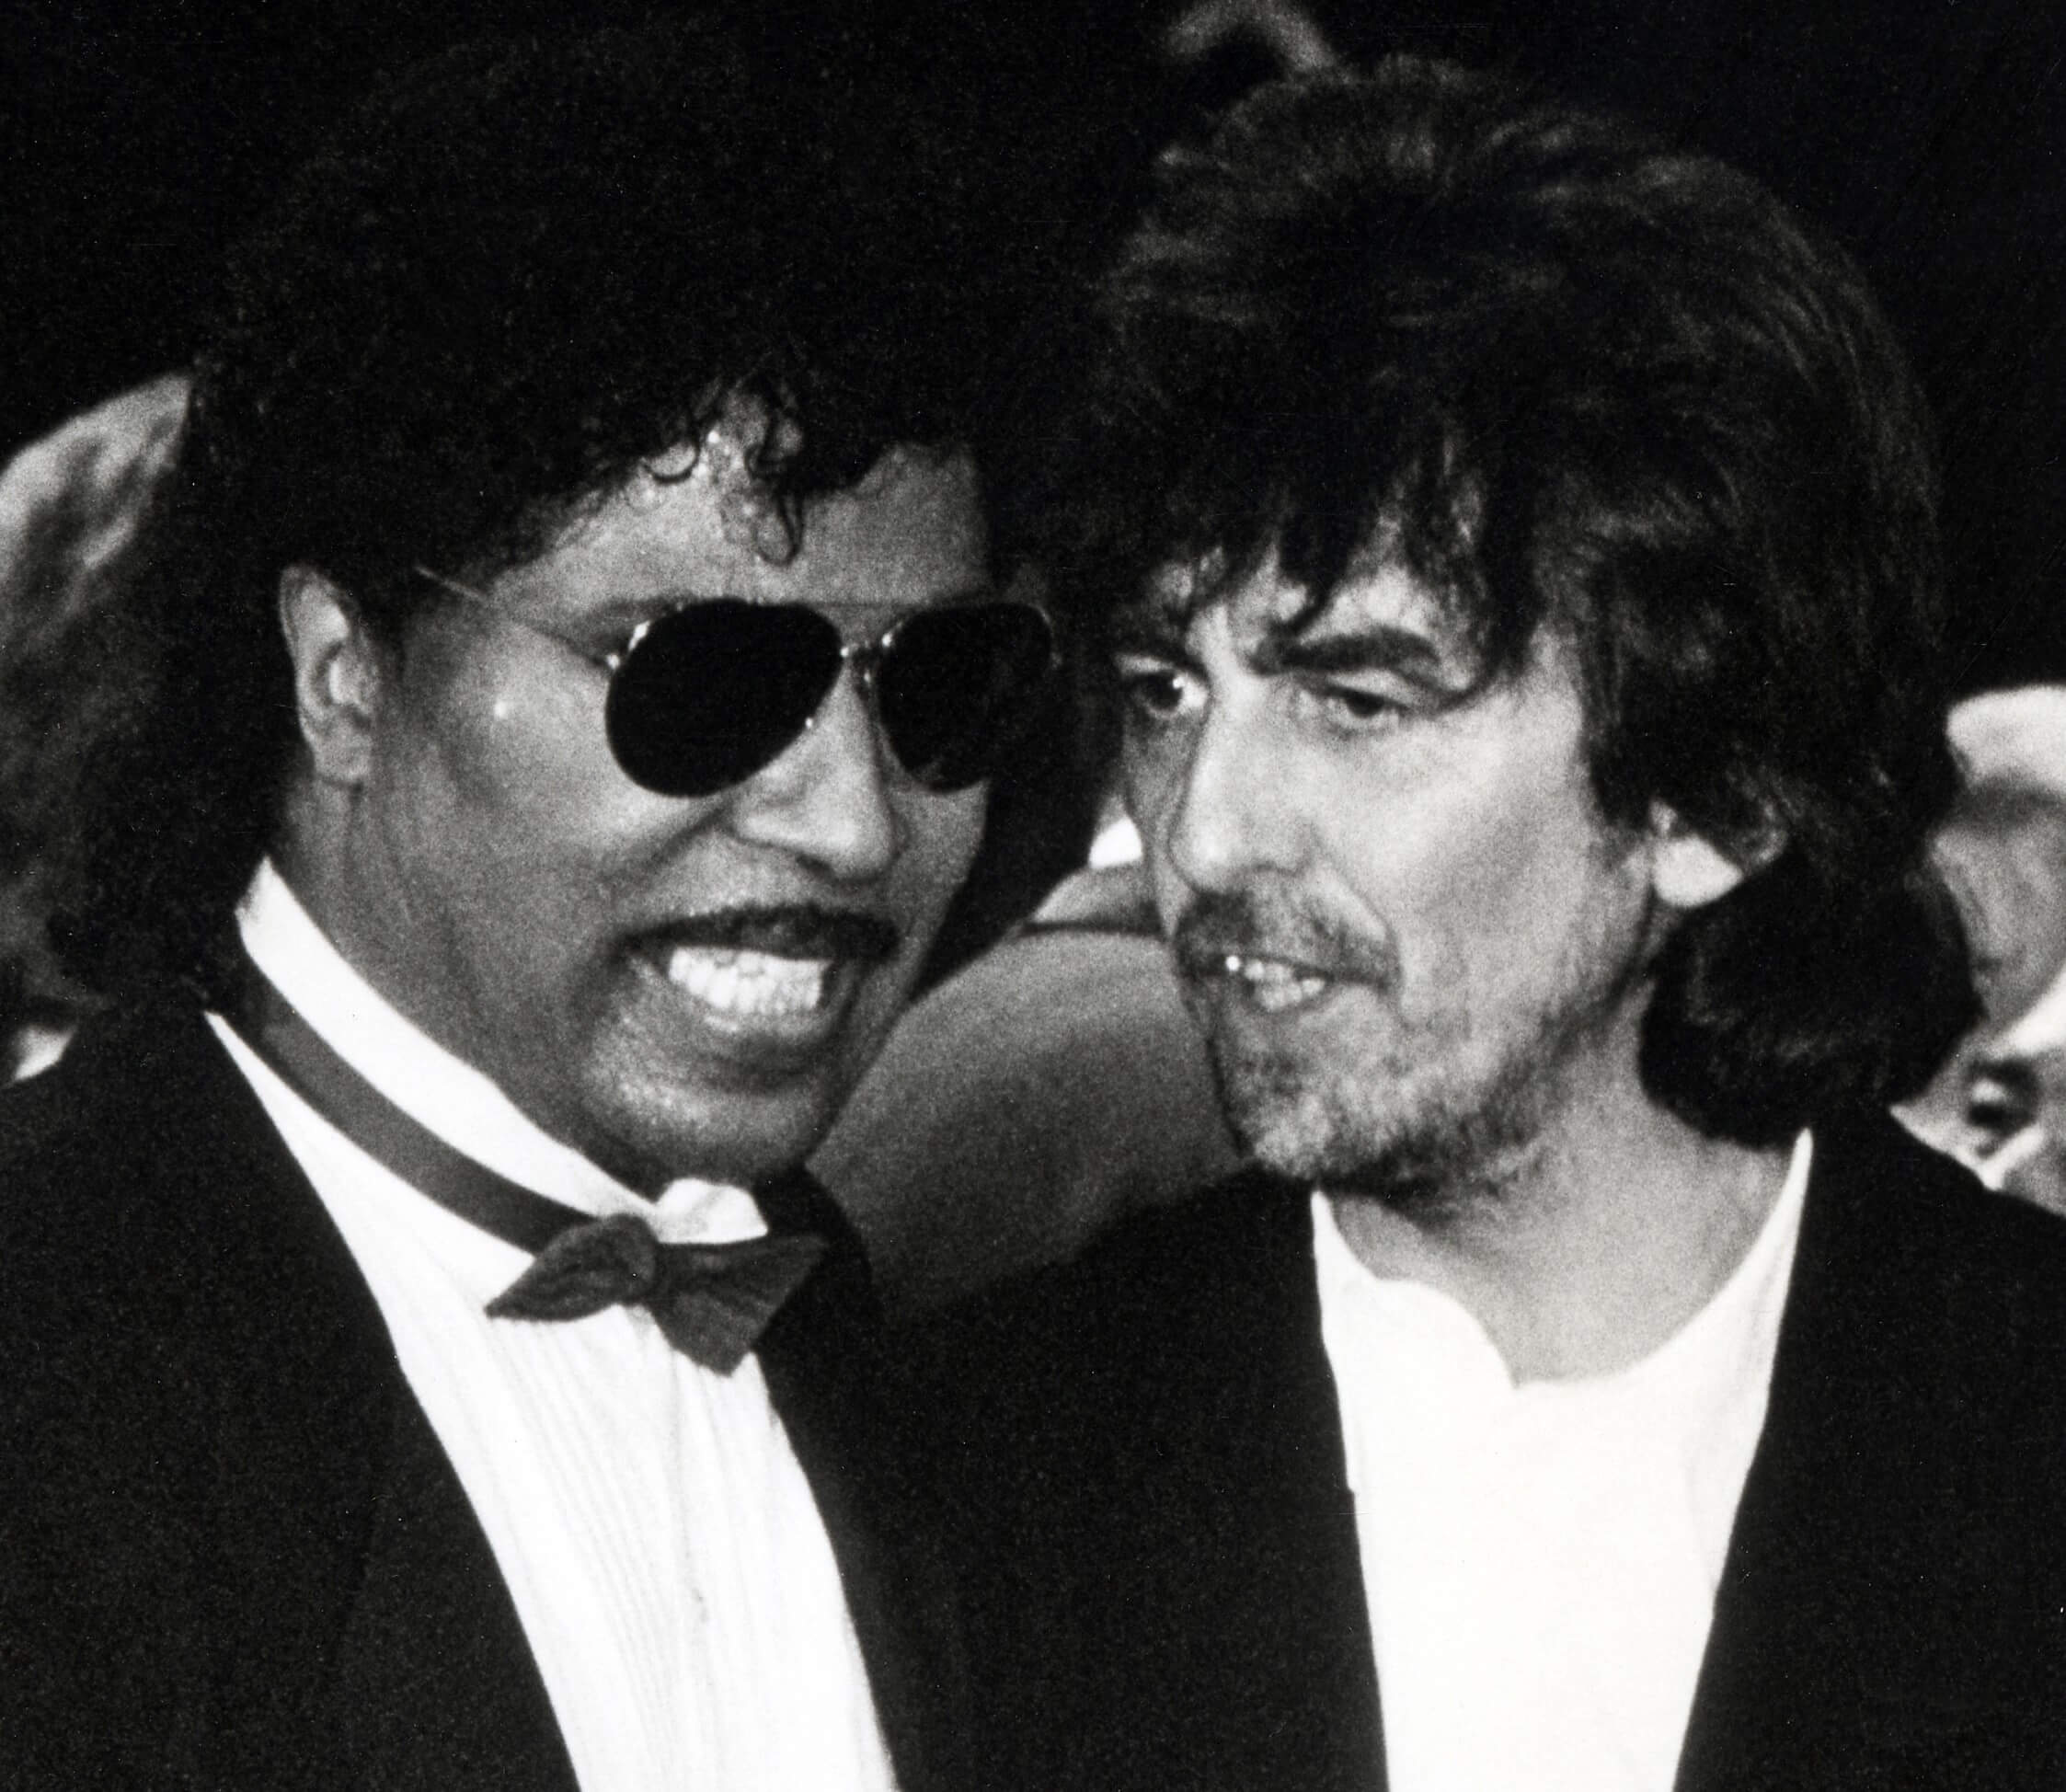 Little Richard and The Beatles' George Harrison in black-and-white